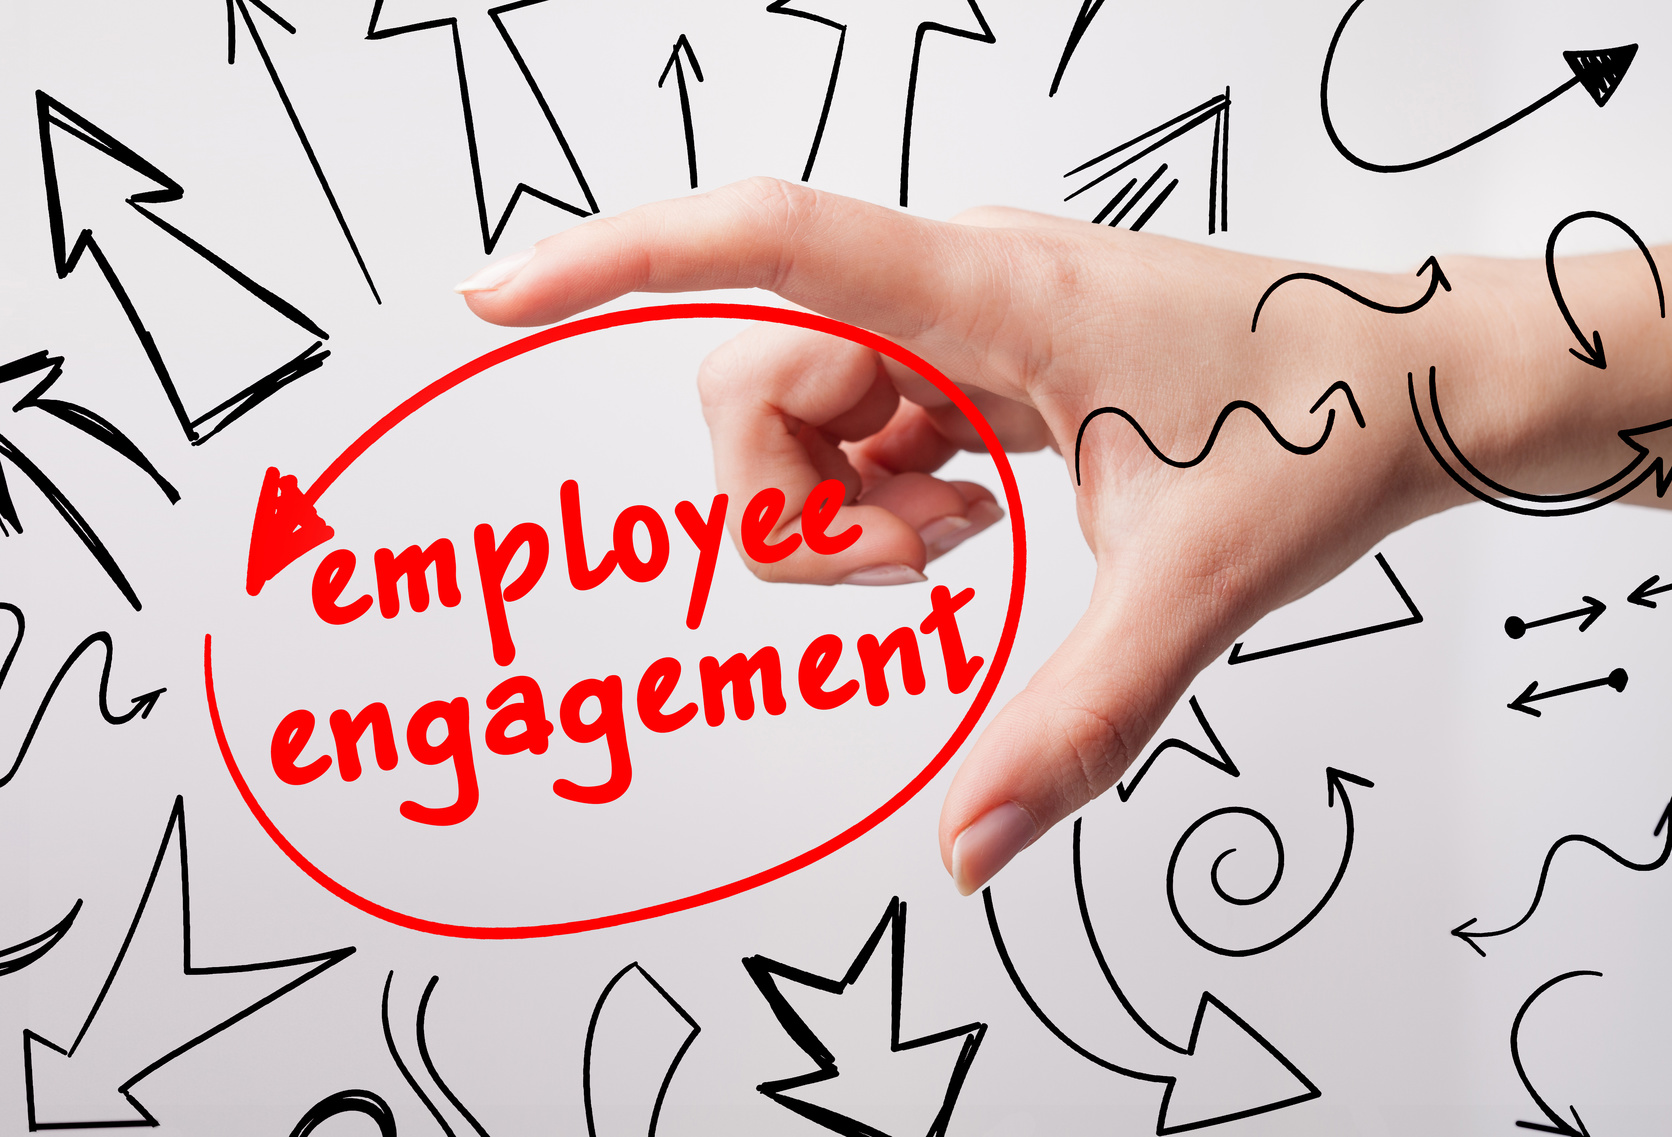 How to Build a Winning Employee Engagement Strategy